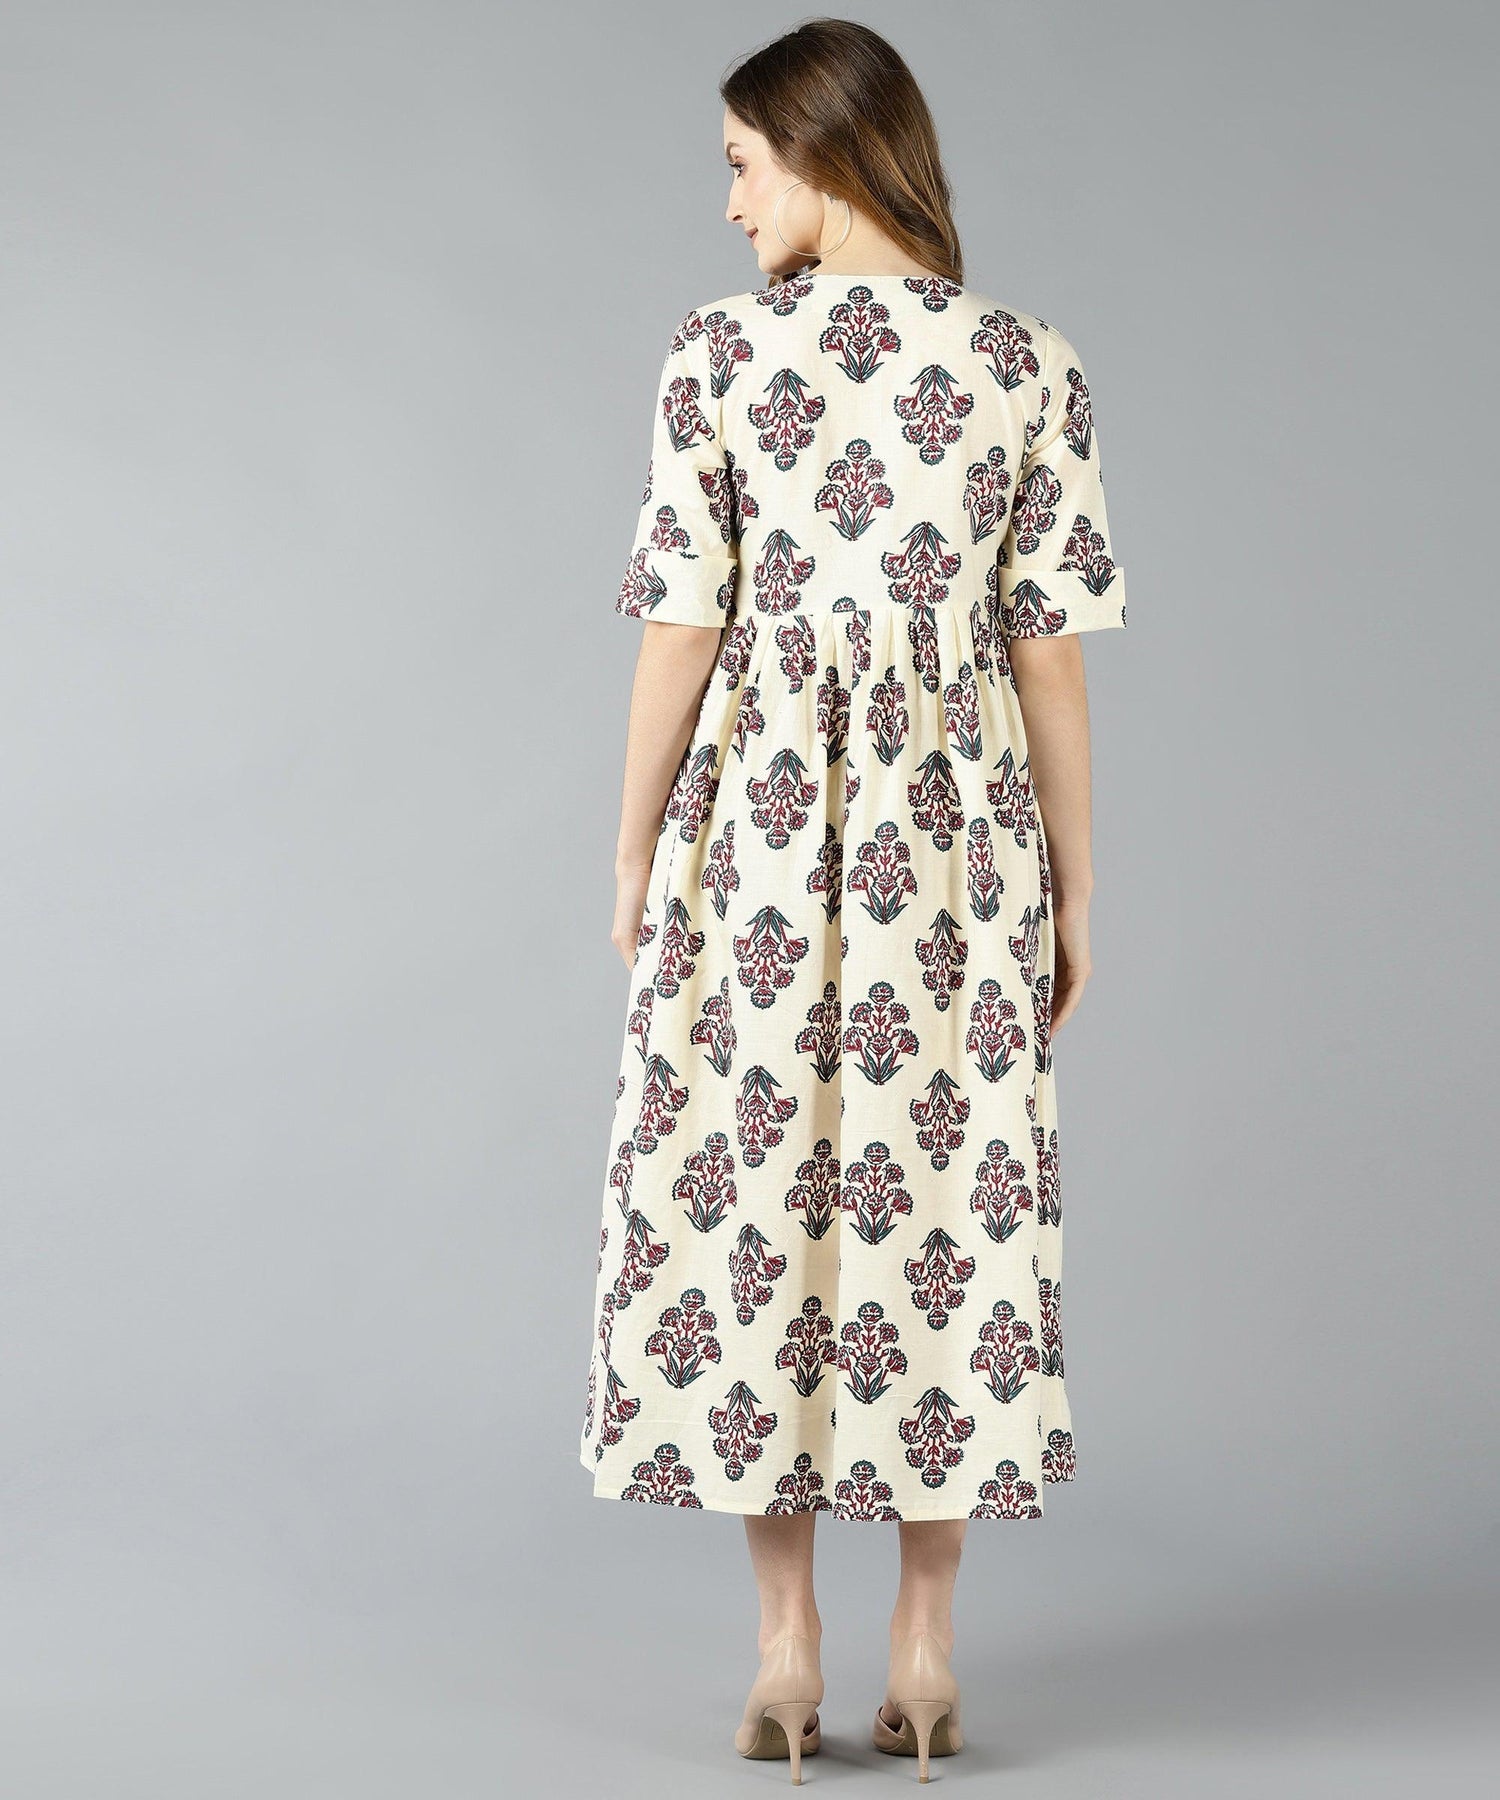 Znx Floral Printed Off White Flared Dress - Znxclothing